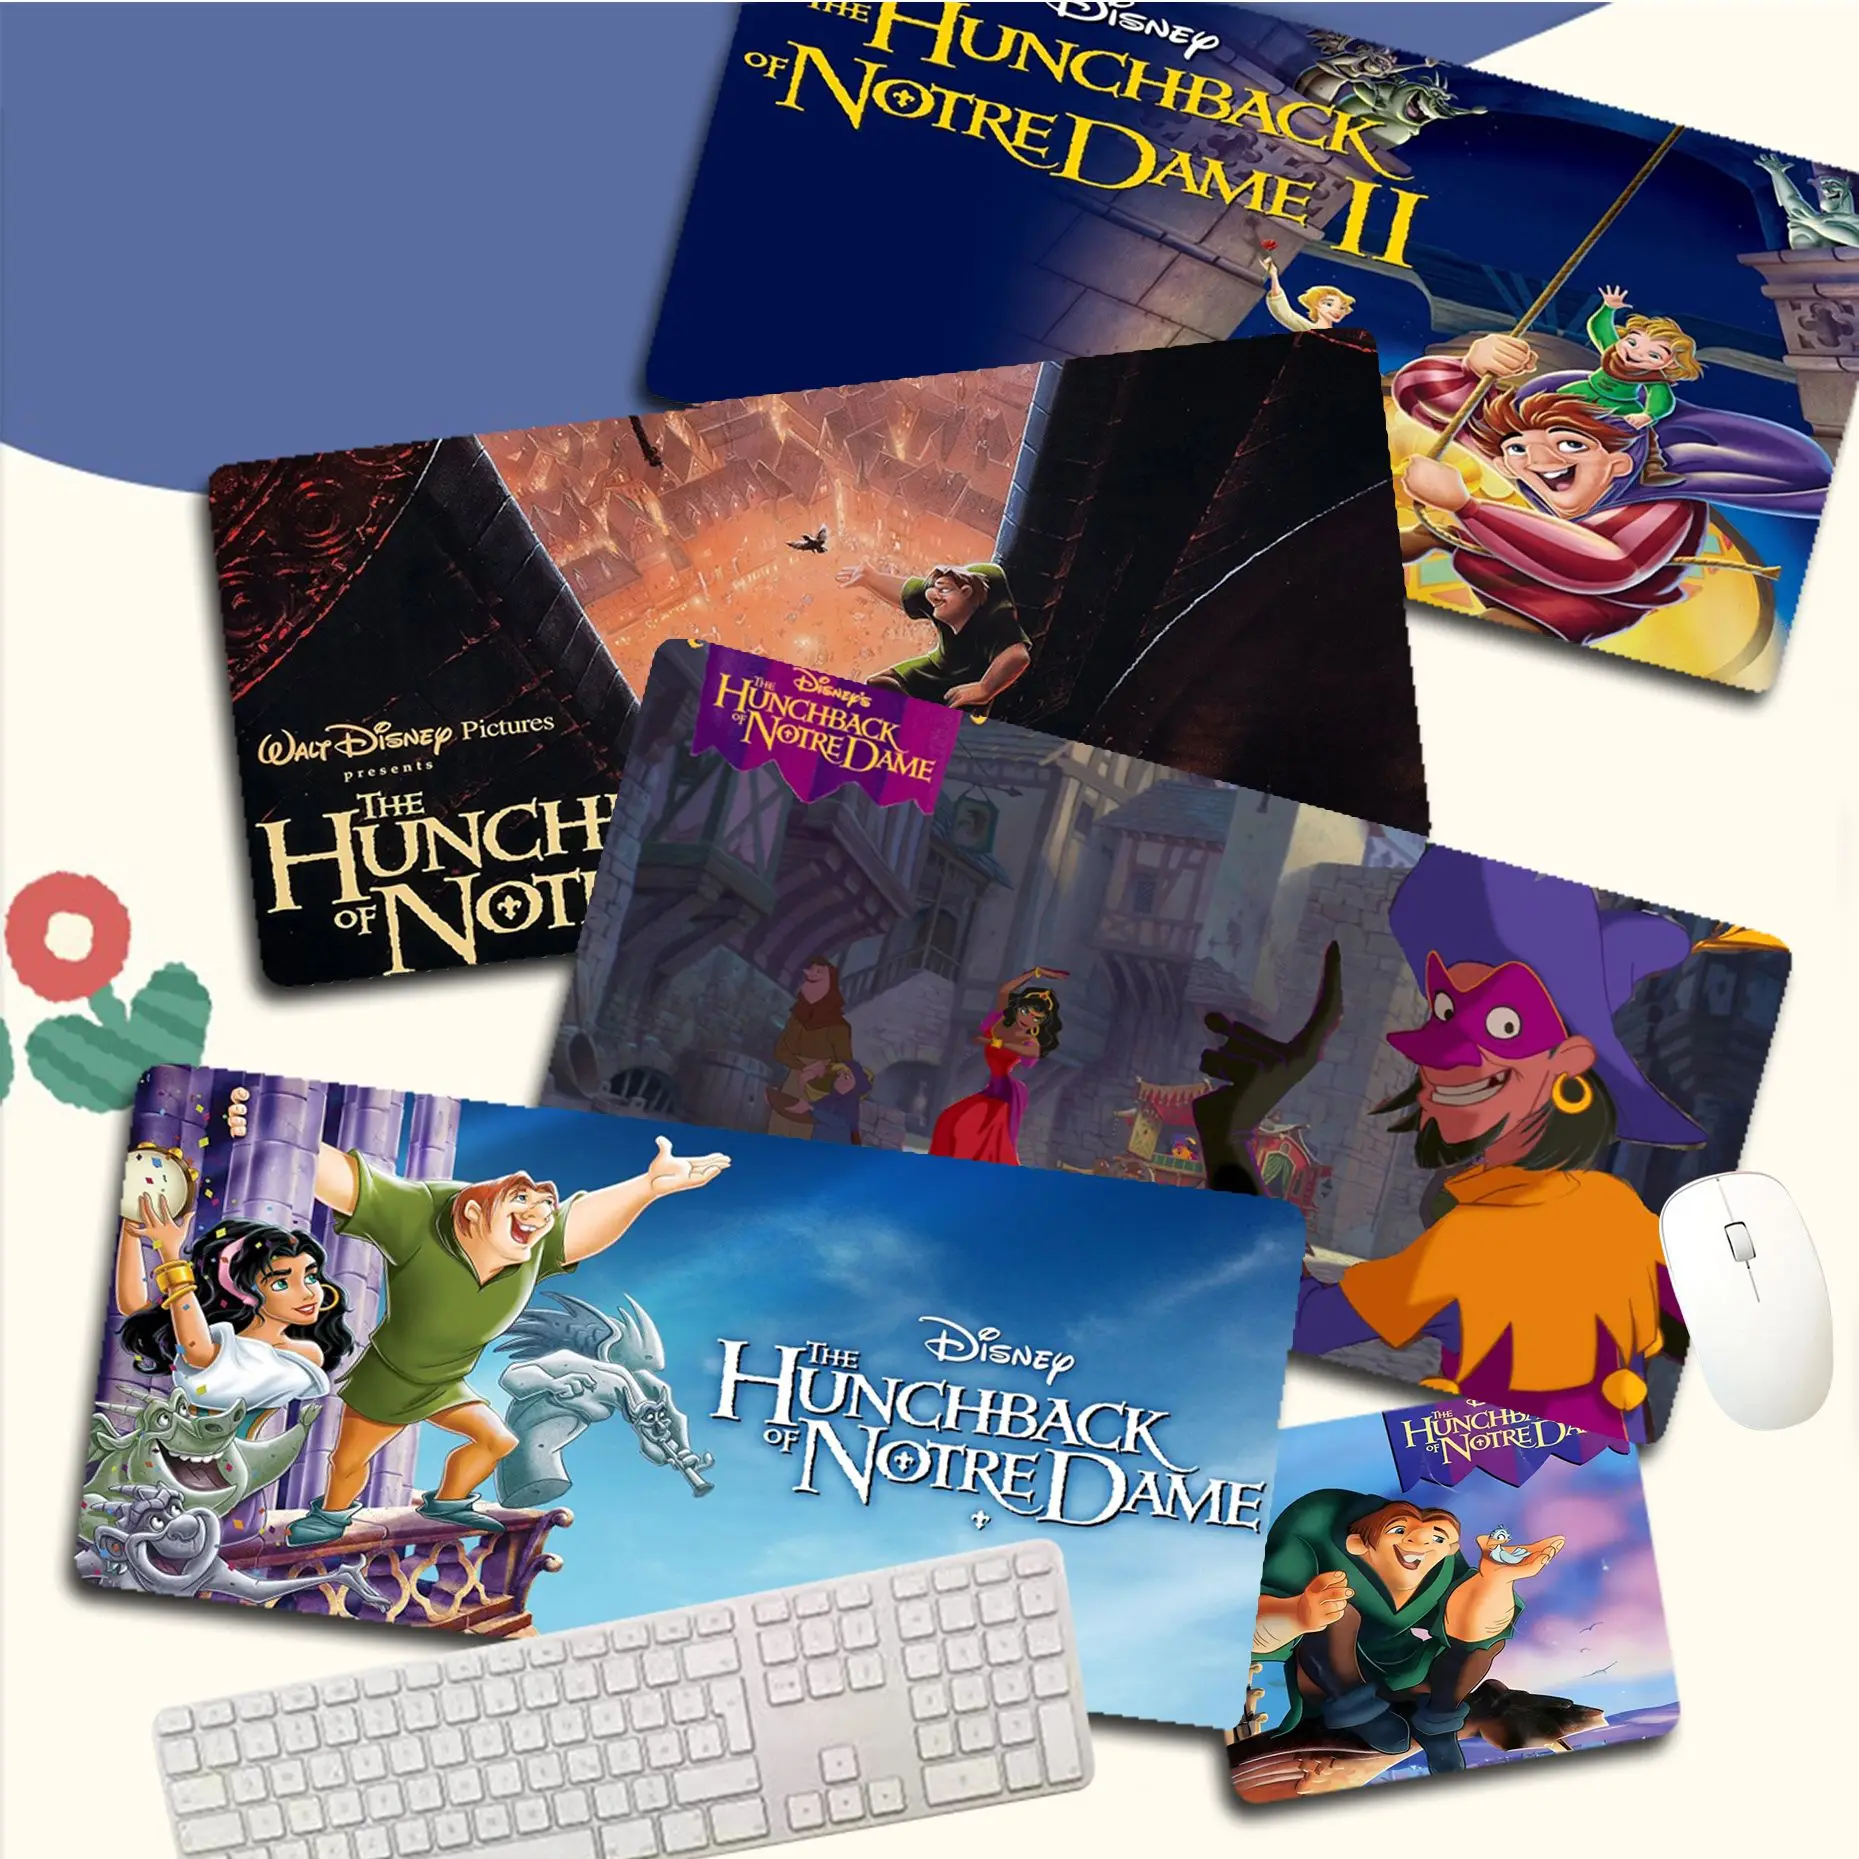 

Disney The Hunchback of Notre Dame Mousepad Funny Beautiful Anime Mouse pad Mat Size for Kawaii Desk Teen Girls for Bedroom